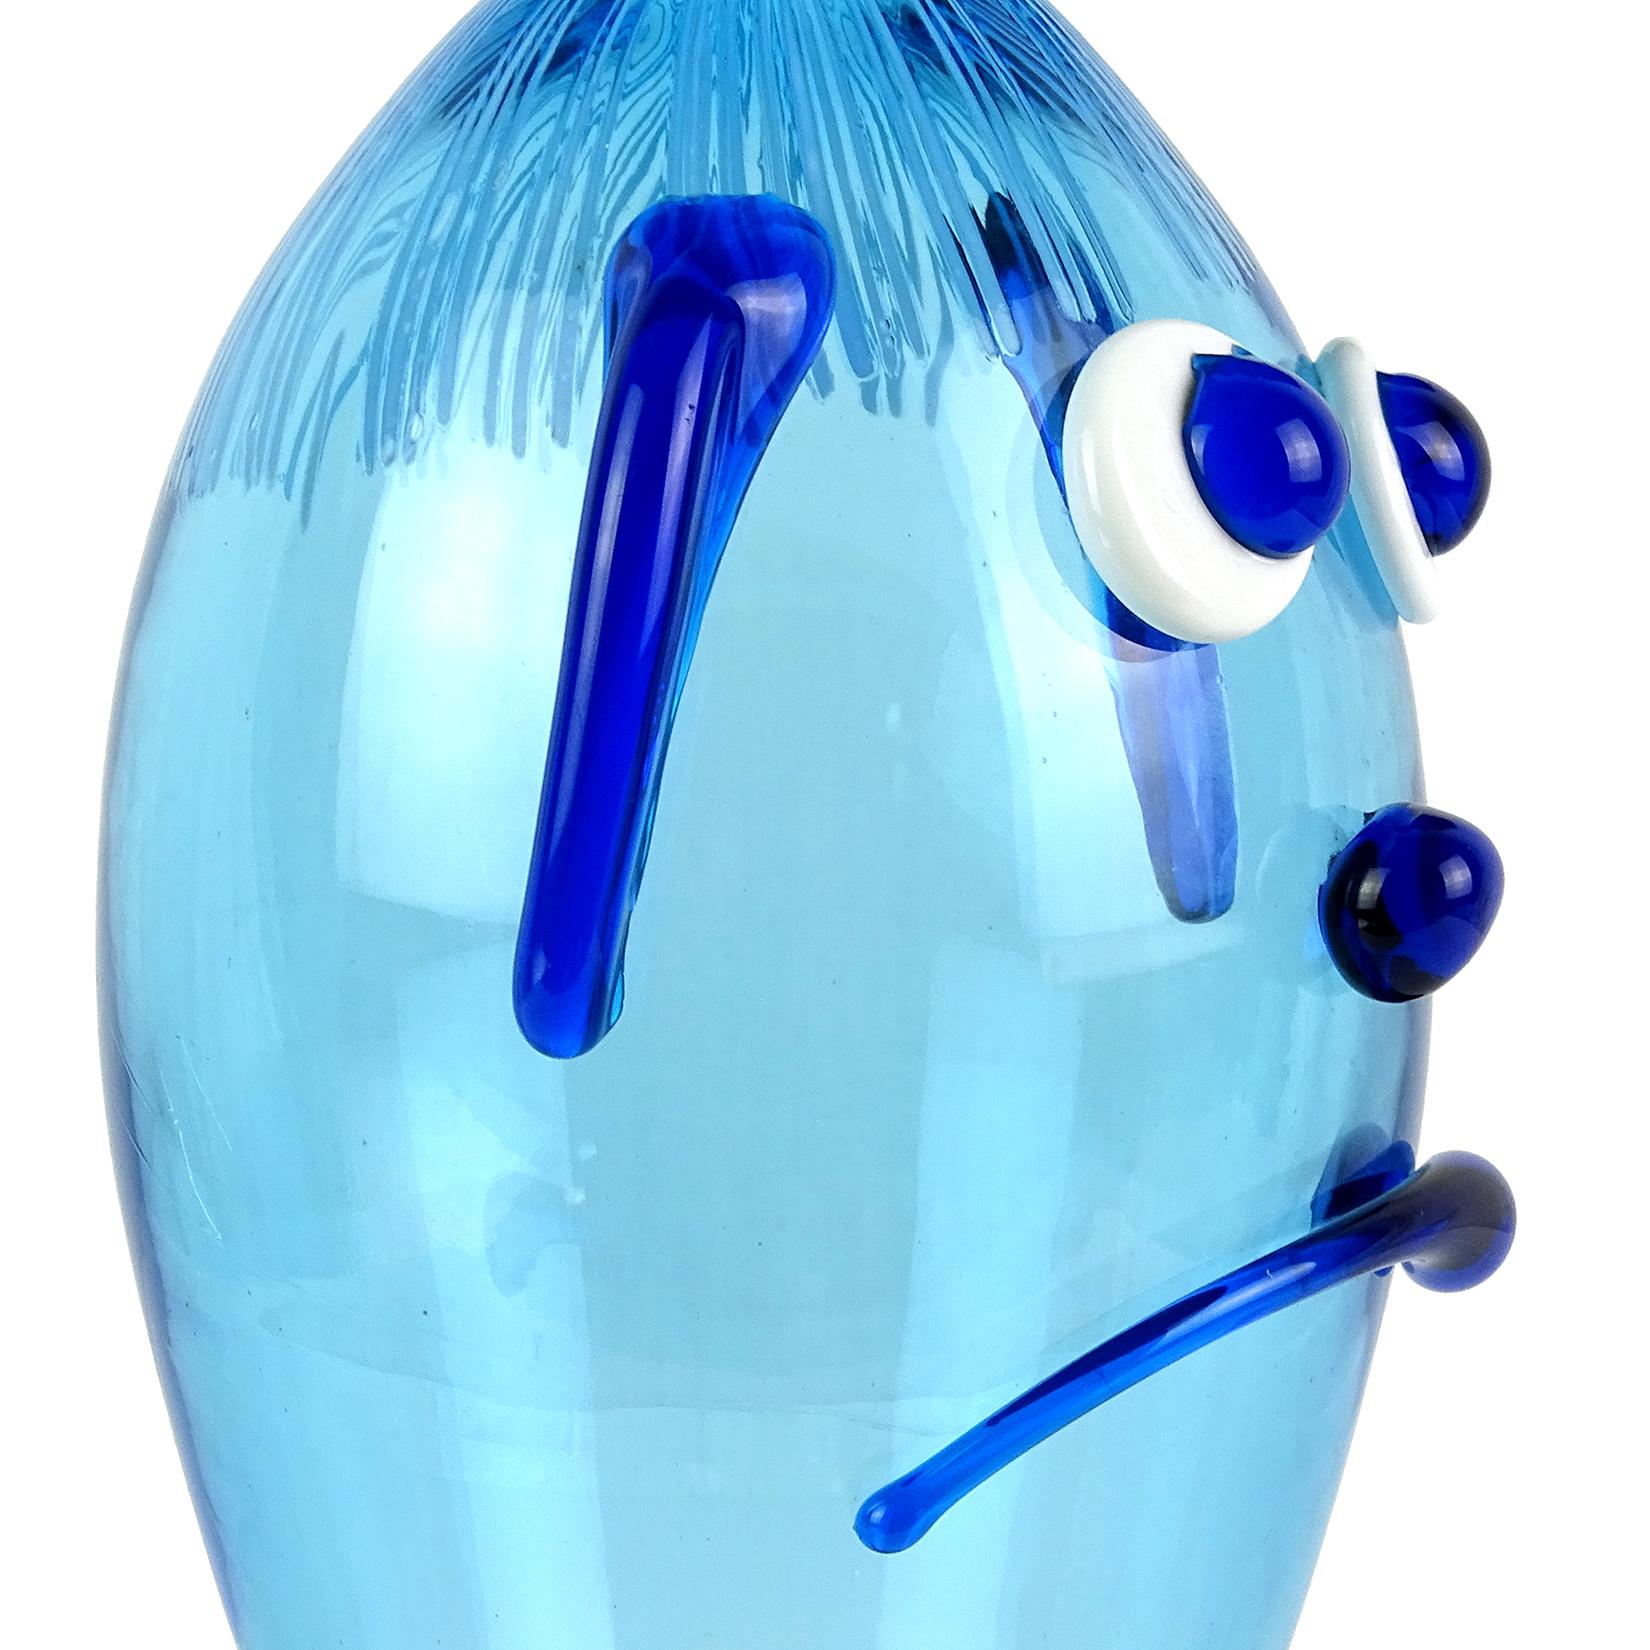 Cute and unusual Murano hand blown Italian art glass decanter, clown face in blue. Documented to the Fratelli Toso Company. The piece has applied ears, big eyes, a frown and threads of light blue glass for the hair. Measures: 11